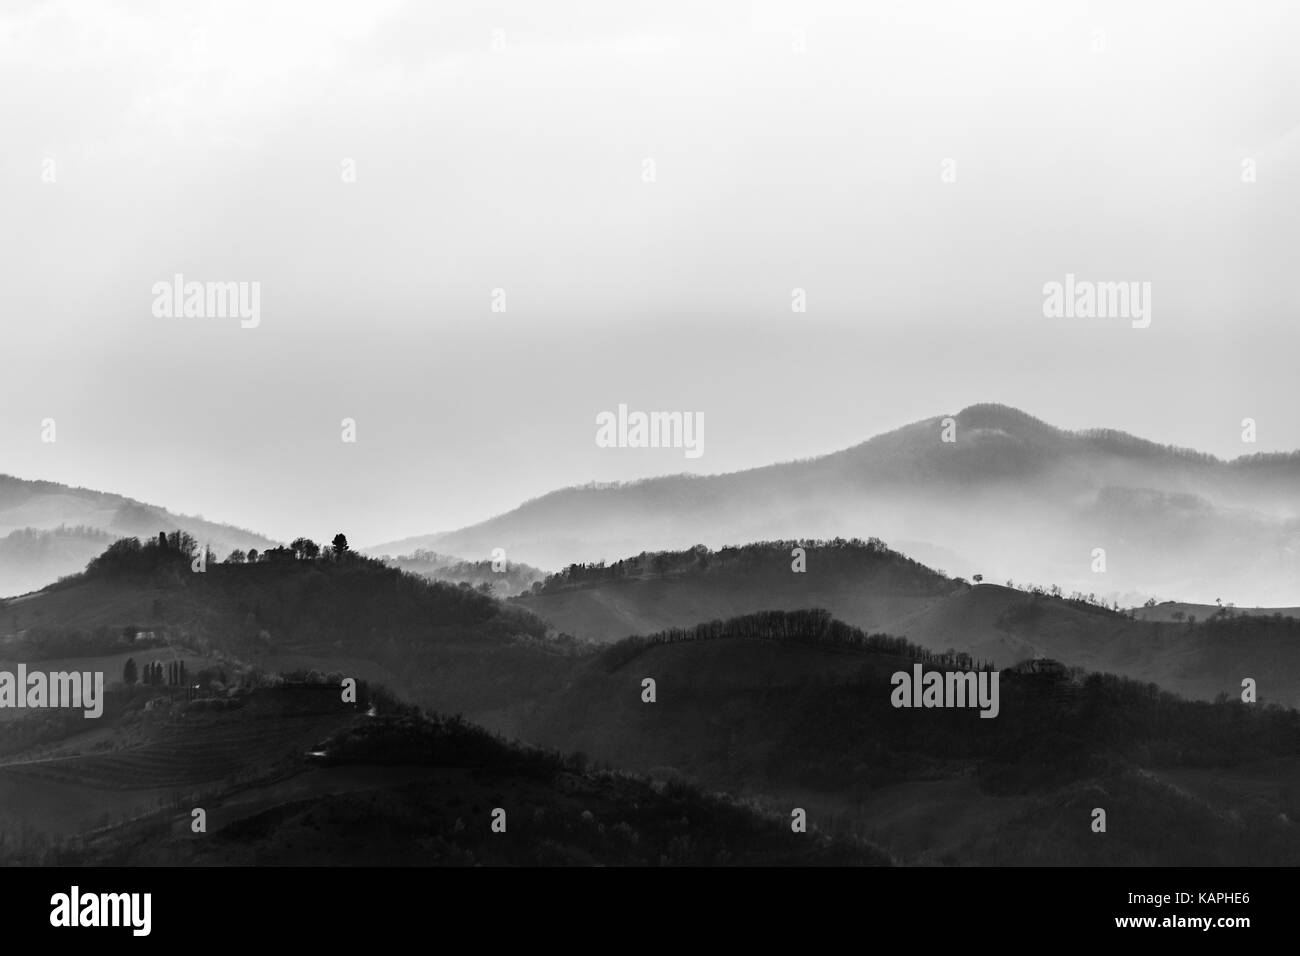 A valley filled by fog, with some hills in the foreground and other hills and mountains in the background Stock Photo